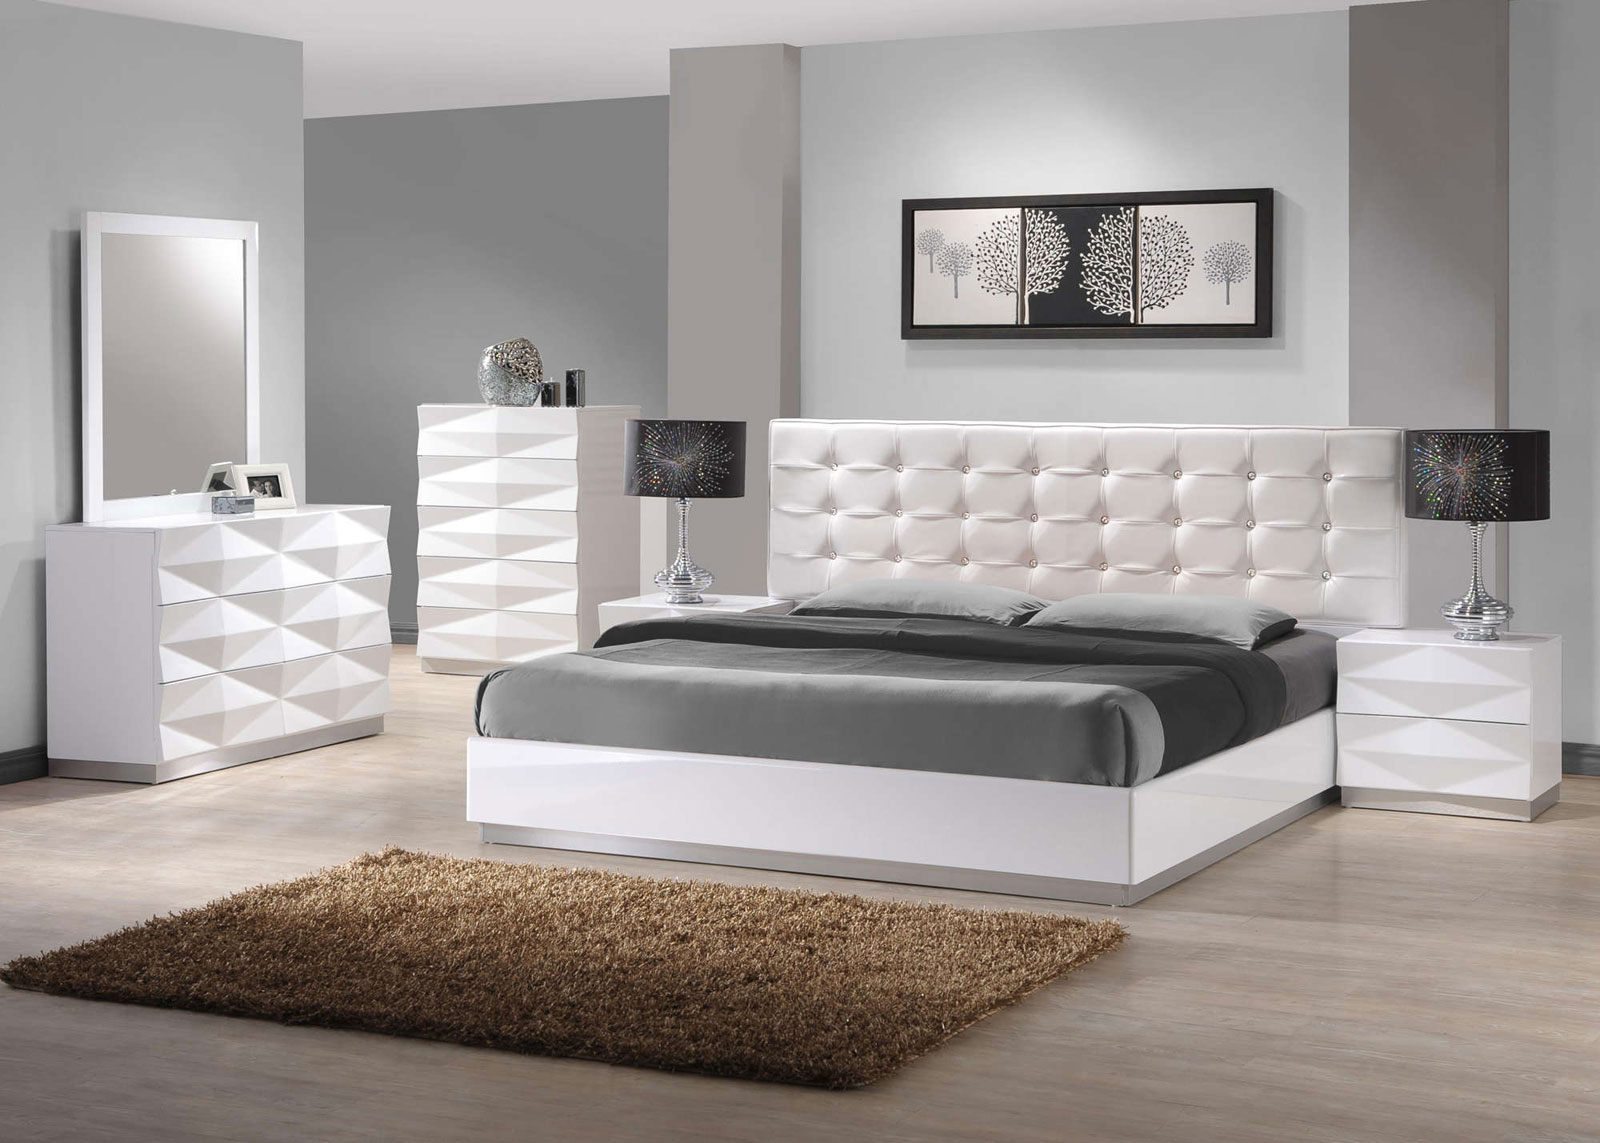 White Queen White Luxurious White Queen Bed Of White Bedroom Furniture With Twin Night Lamp On Nightstands Completed With Mirror On Vanity Table And Furnished With Brown Rug Bedroom 15 Simple White Bedroom Furniture For Your Romantic Modern House